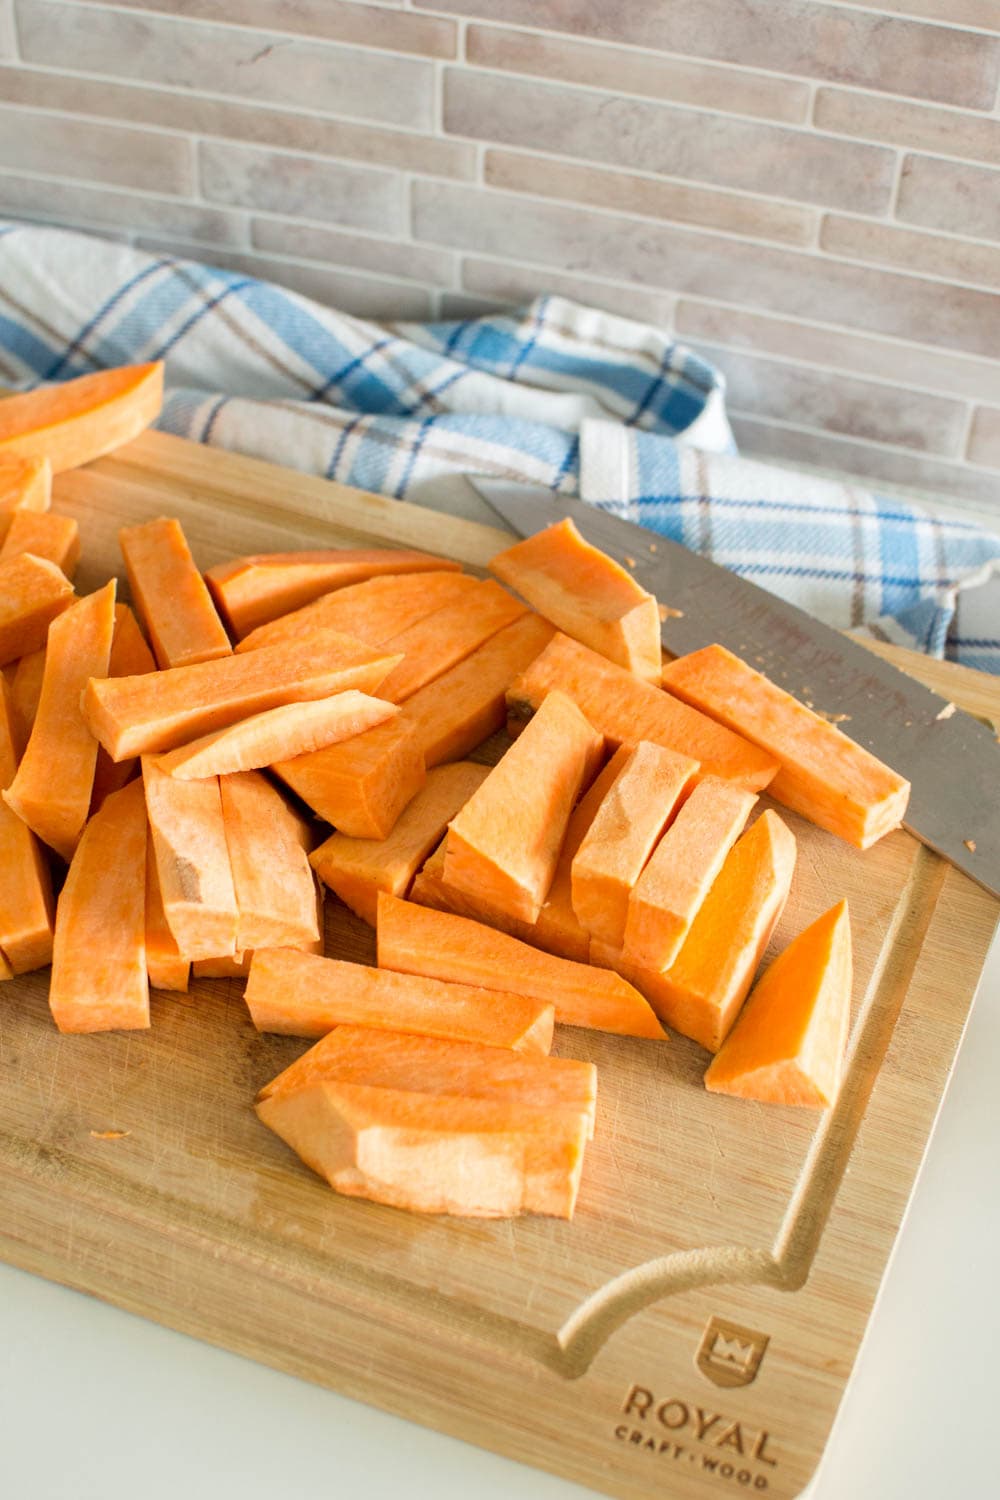 Slices of sweet potatoes on a wooden cutting board